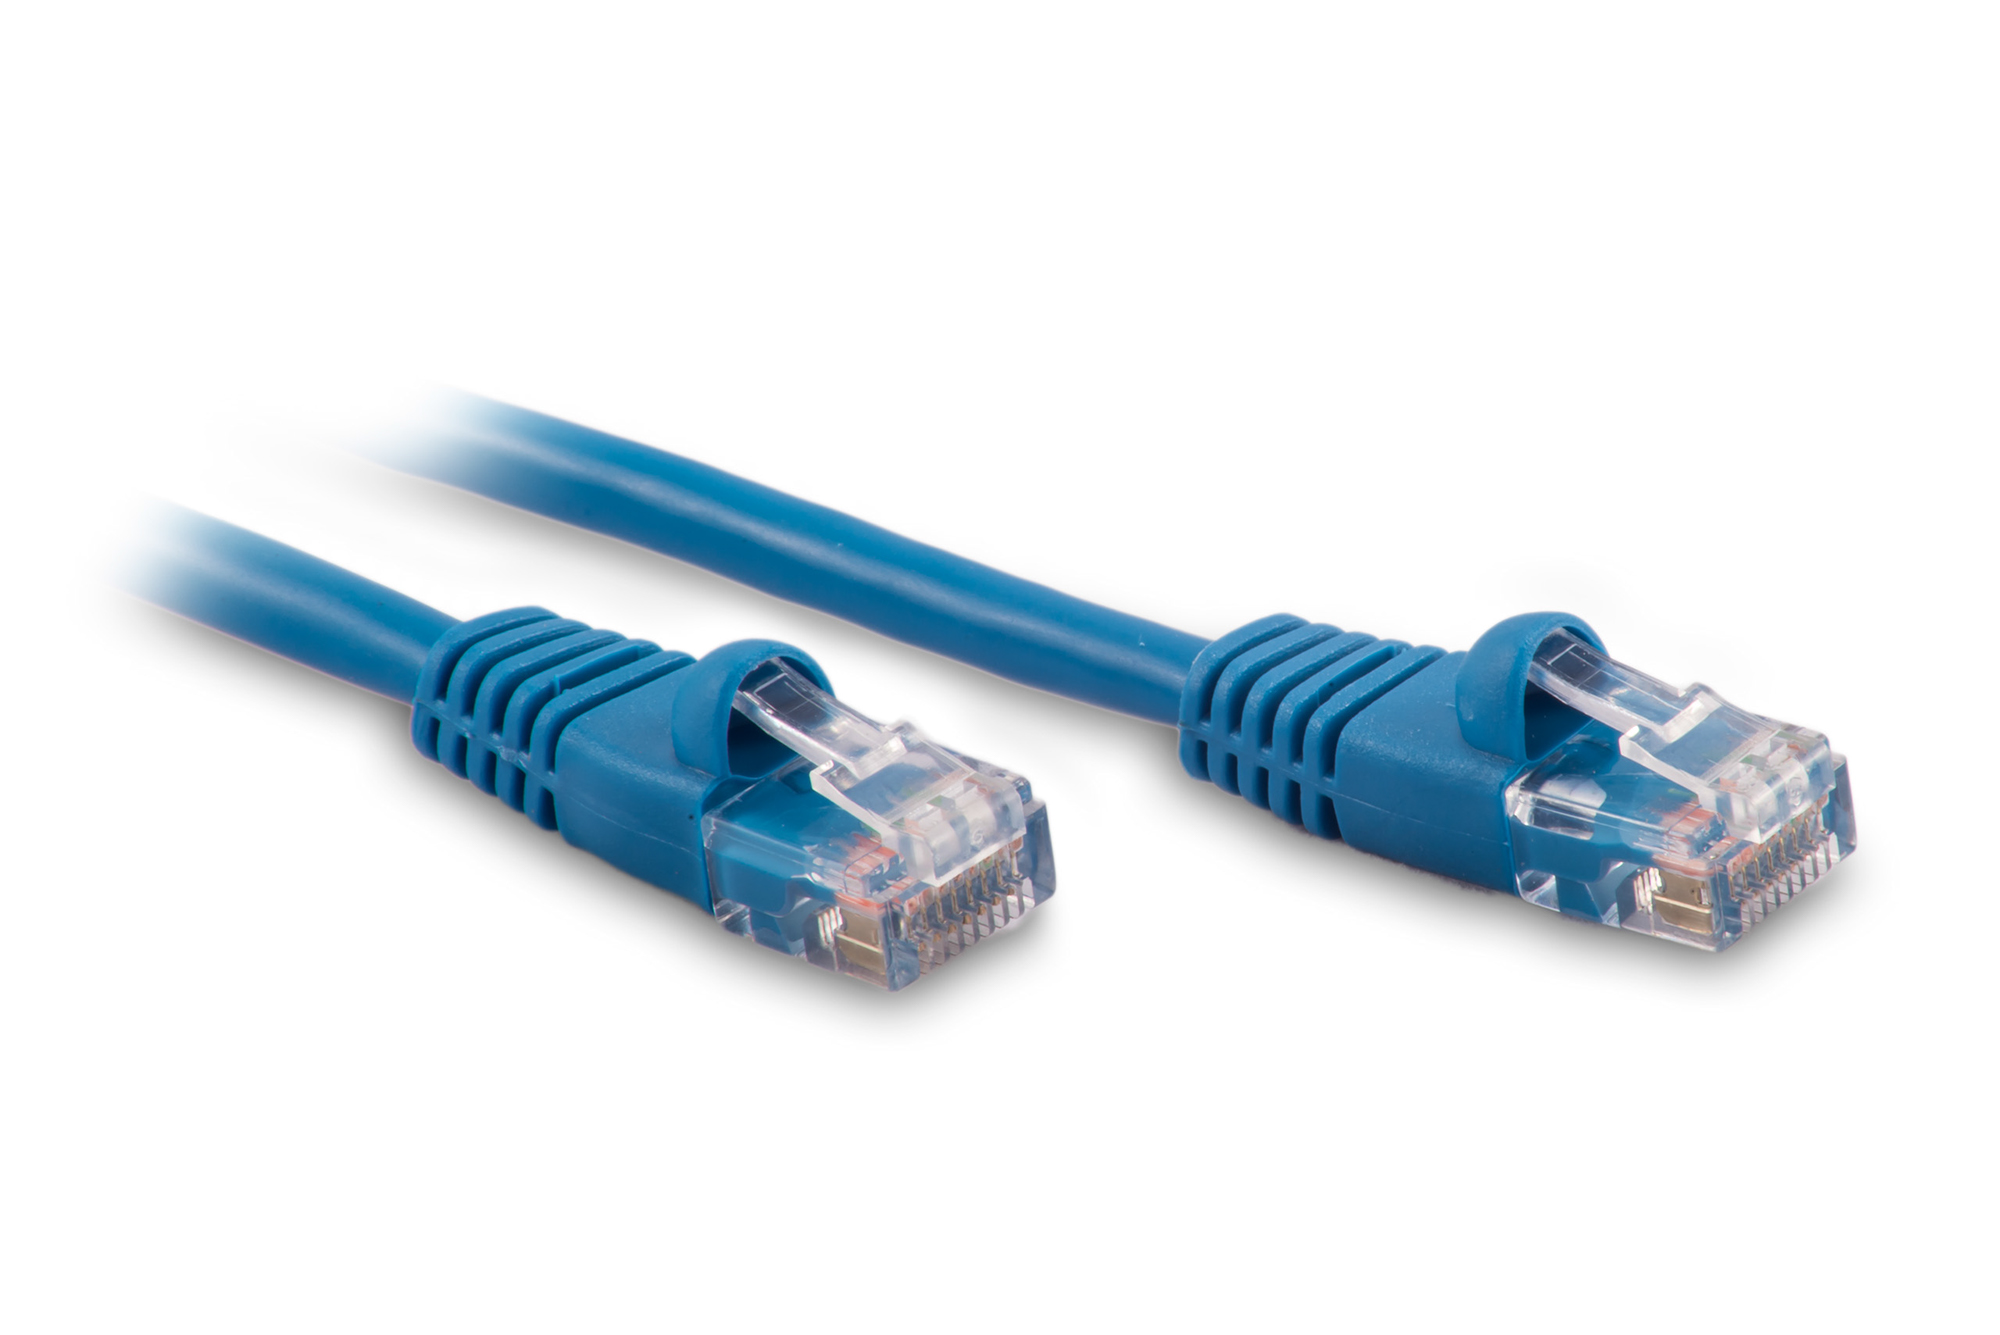 10ft Cat5e Ethernet Patch Cable - Blue Color - Snagless Boot, Stranded, RJ45, 350Mhz, 24AWG